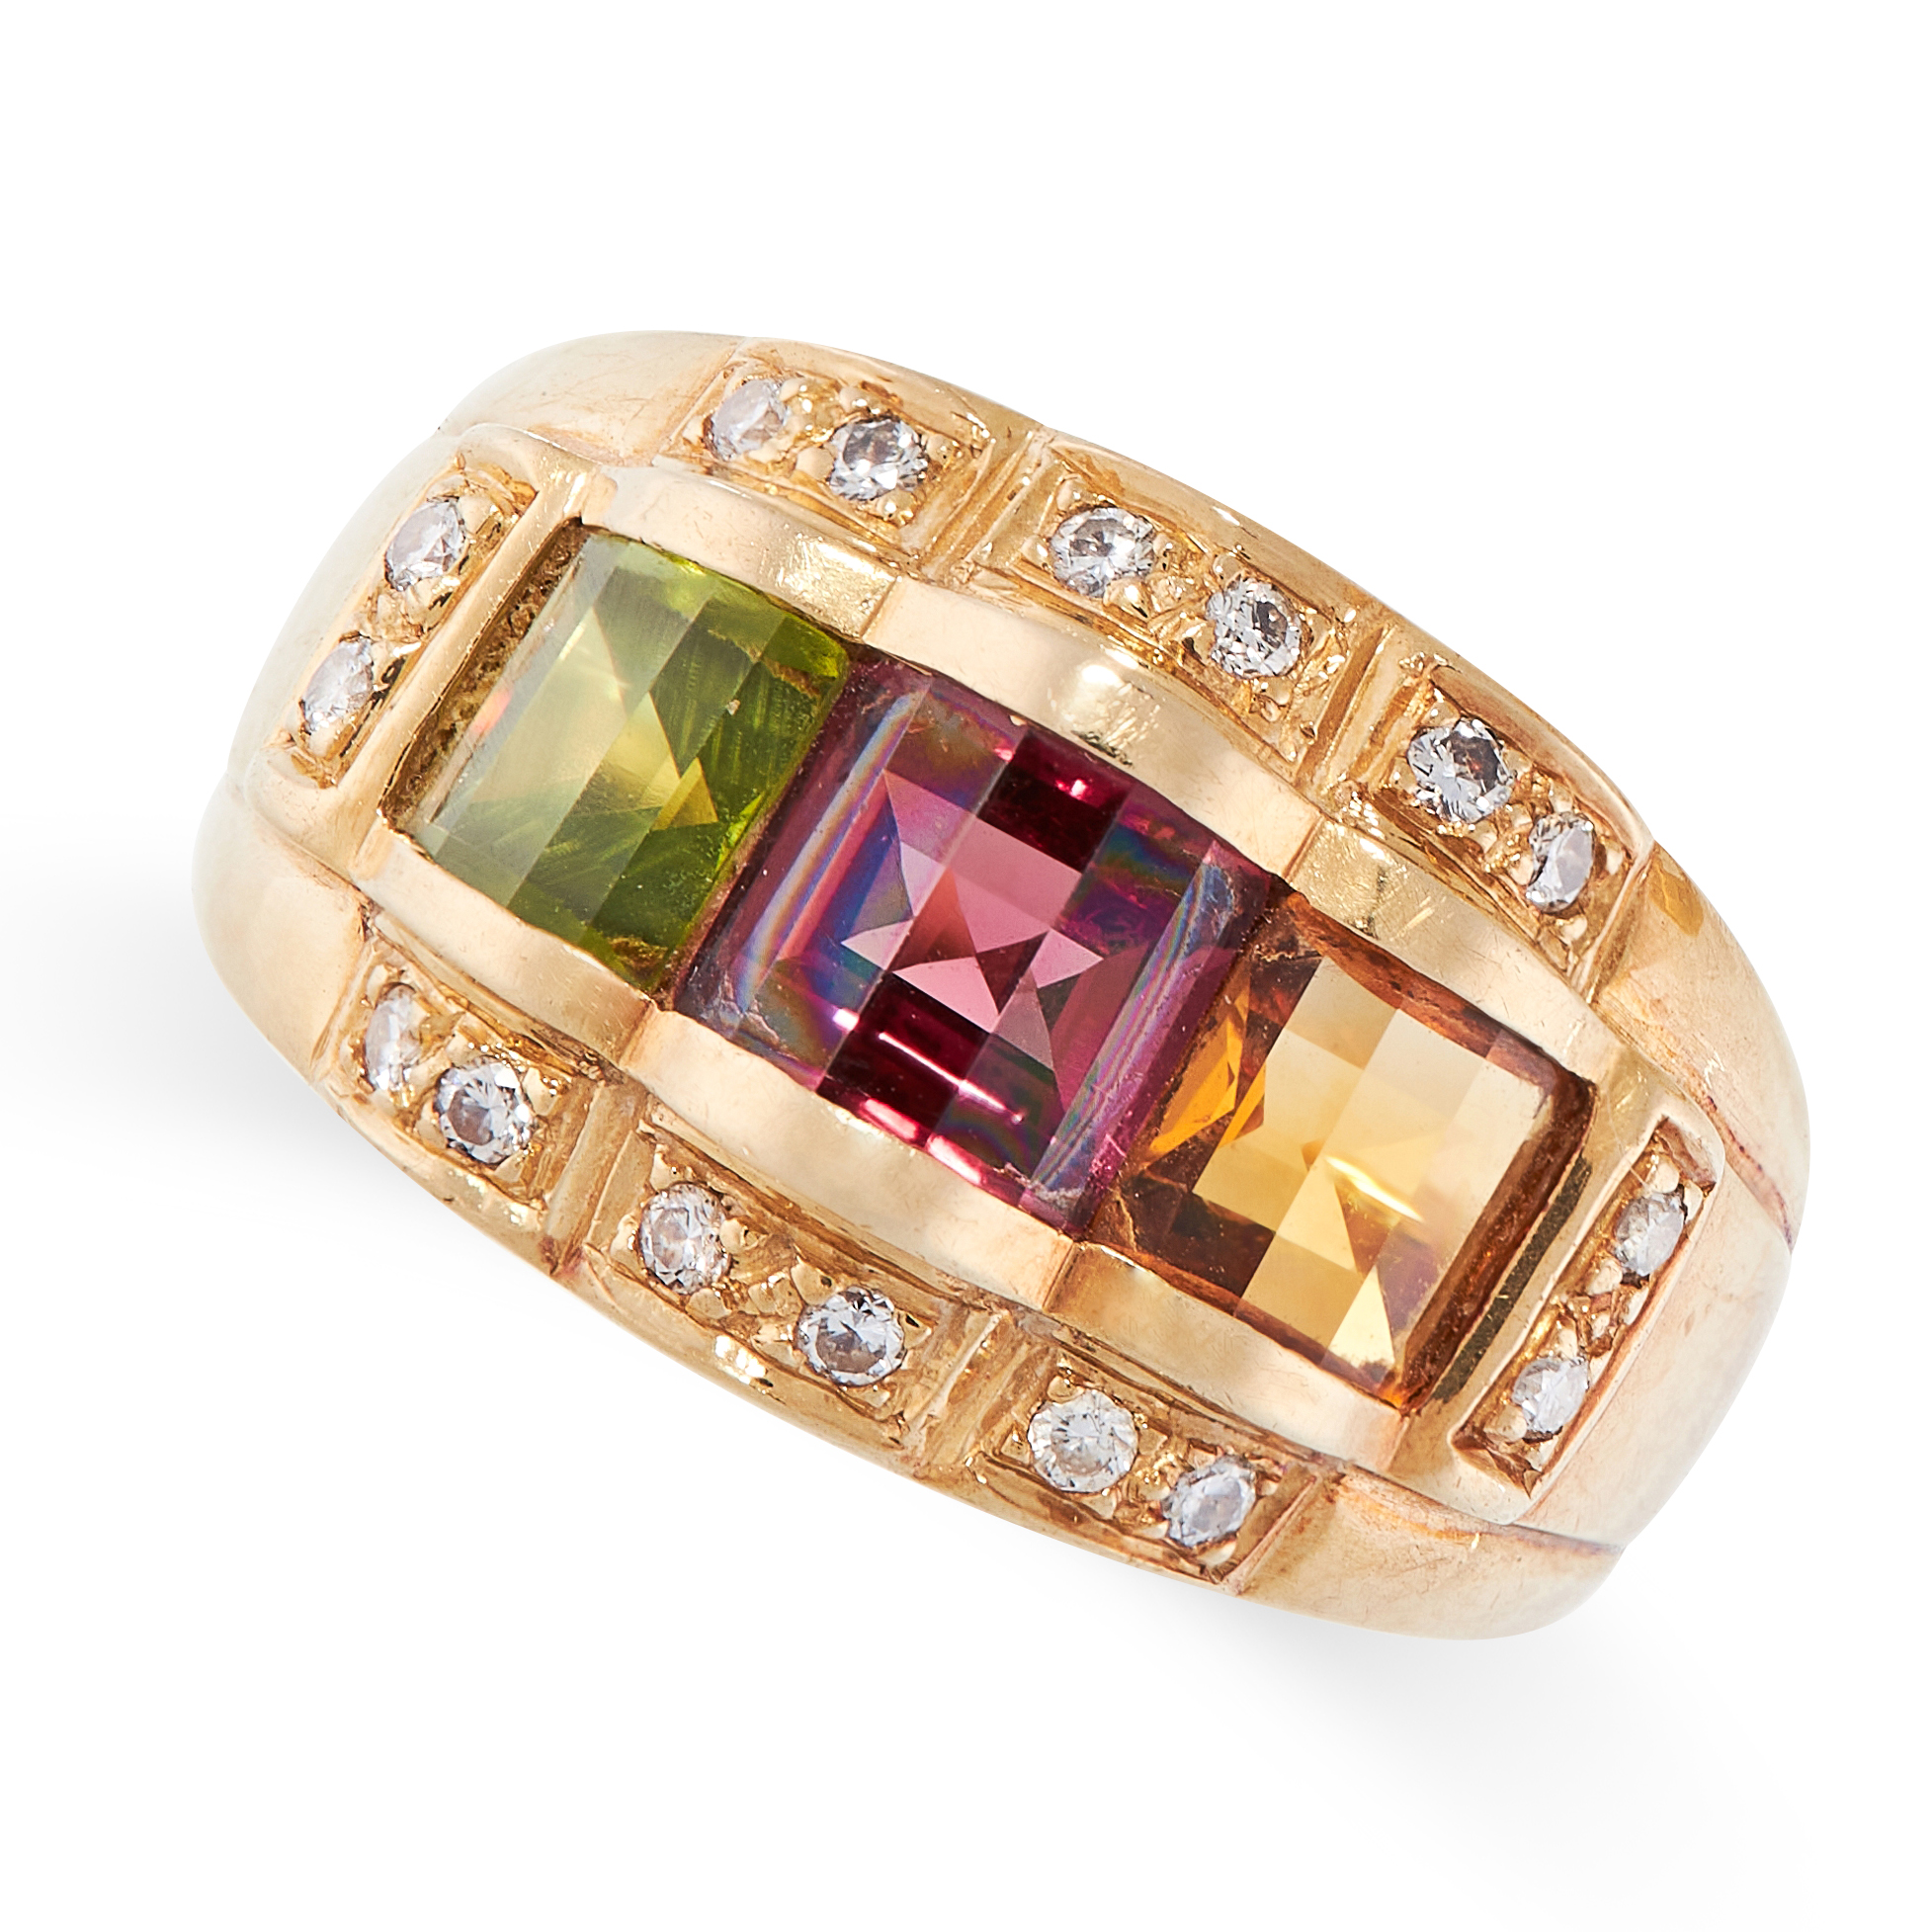 A CITRINE, GARNET, PERIDOT AND DIAMOND RING in 18ct yellow gold, set with a central panel of